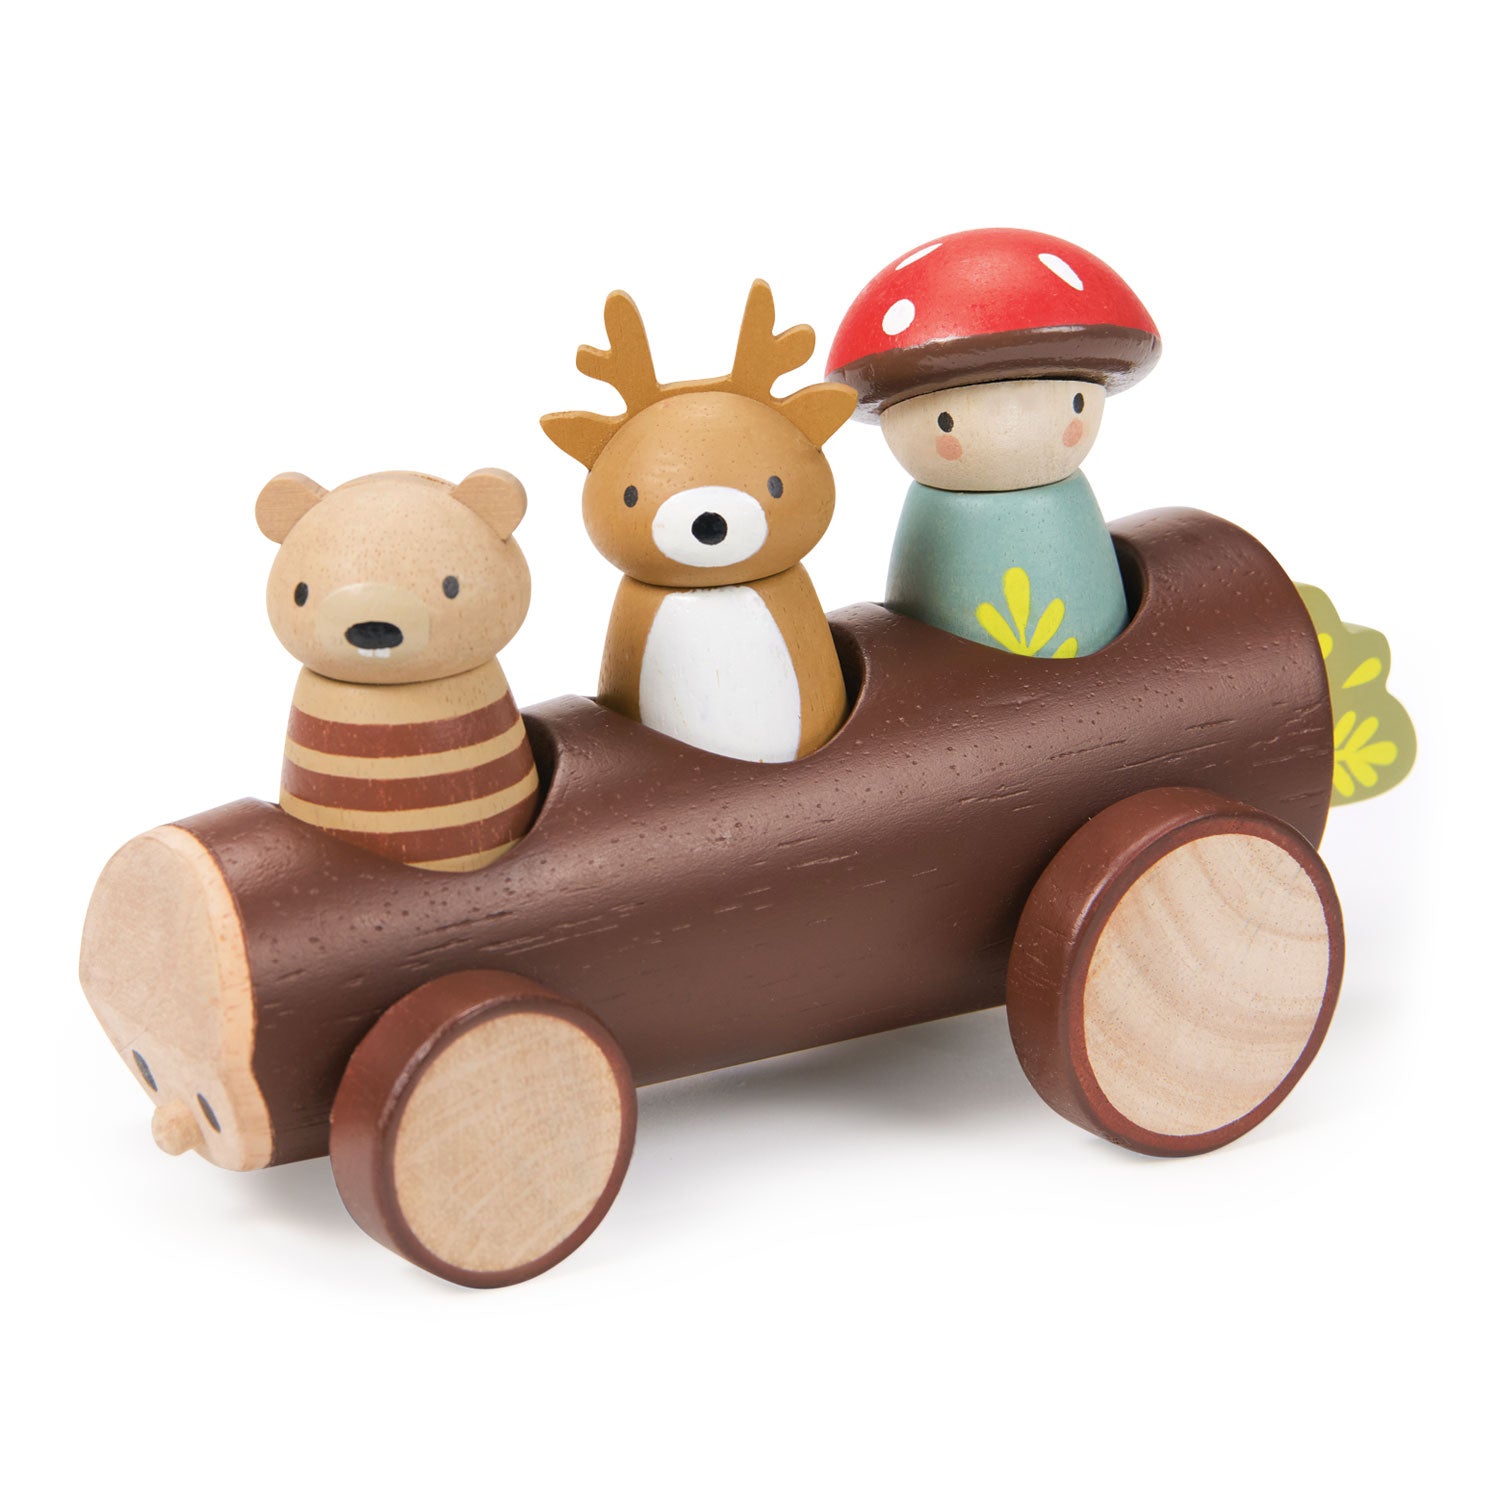 Buy best price Tender Leaf Toys Timber Taxi at BeoVERDE Ireland